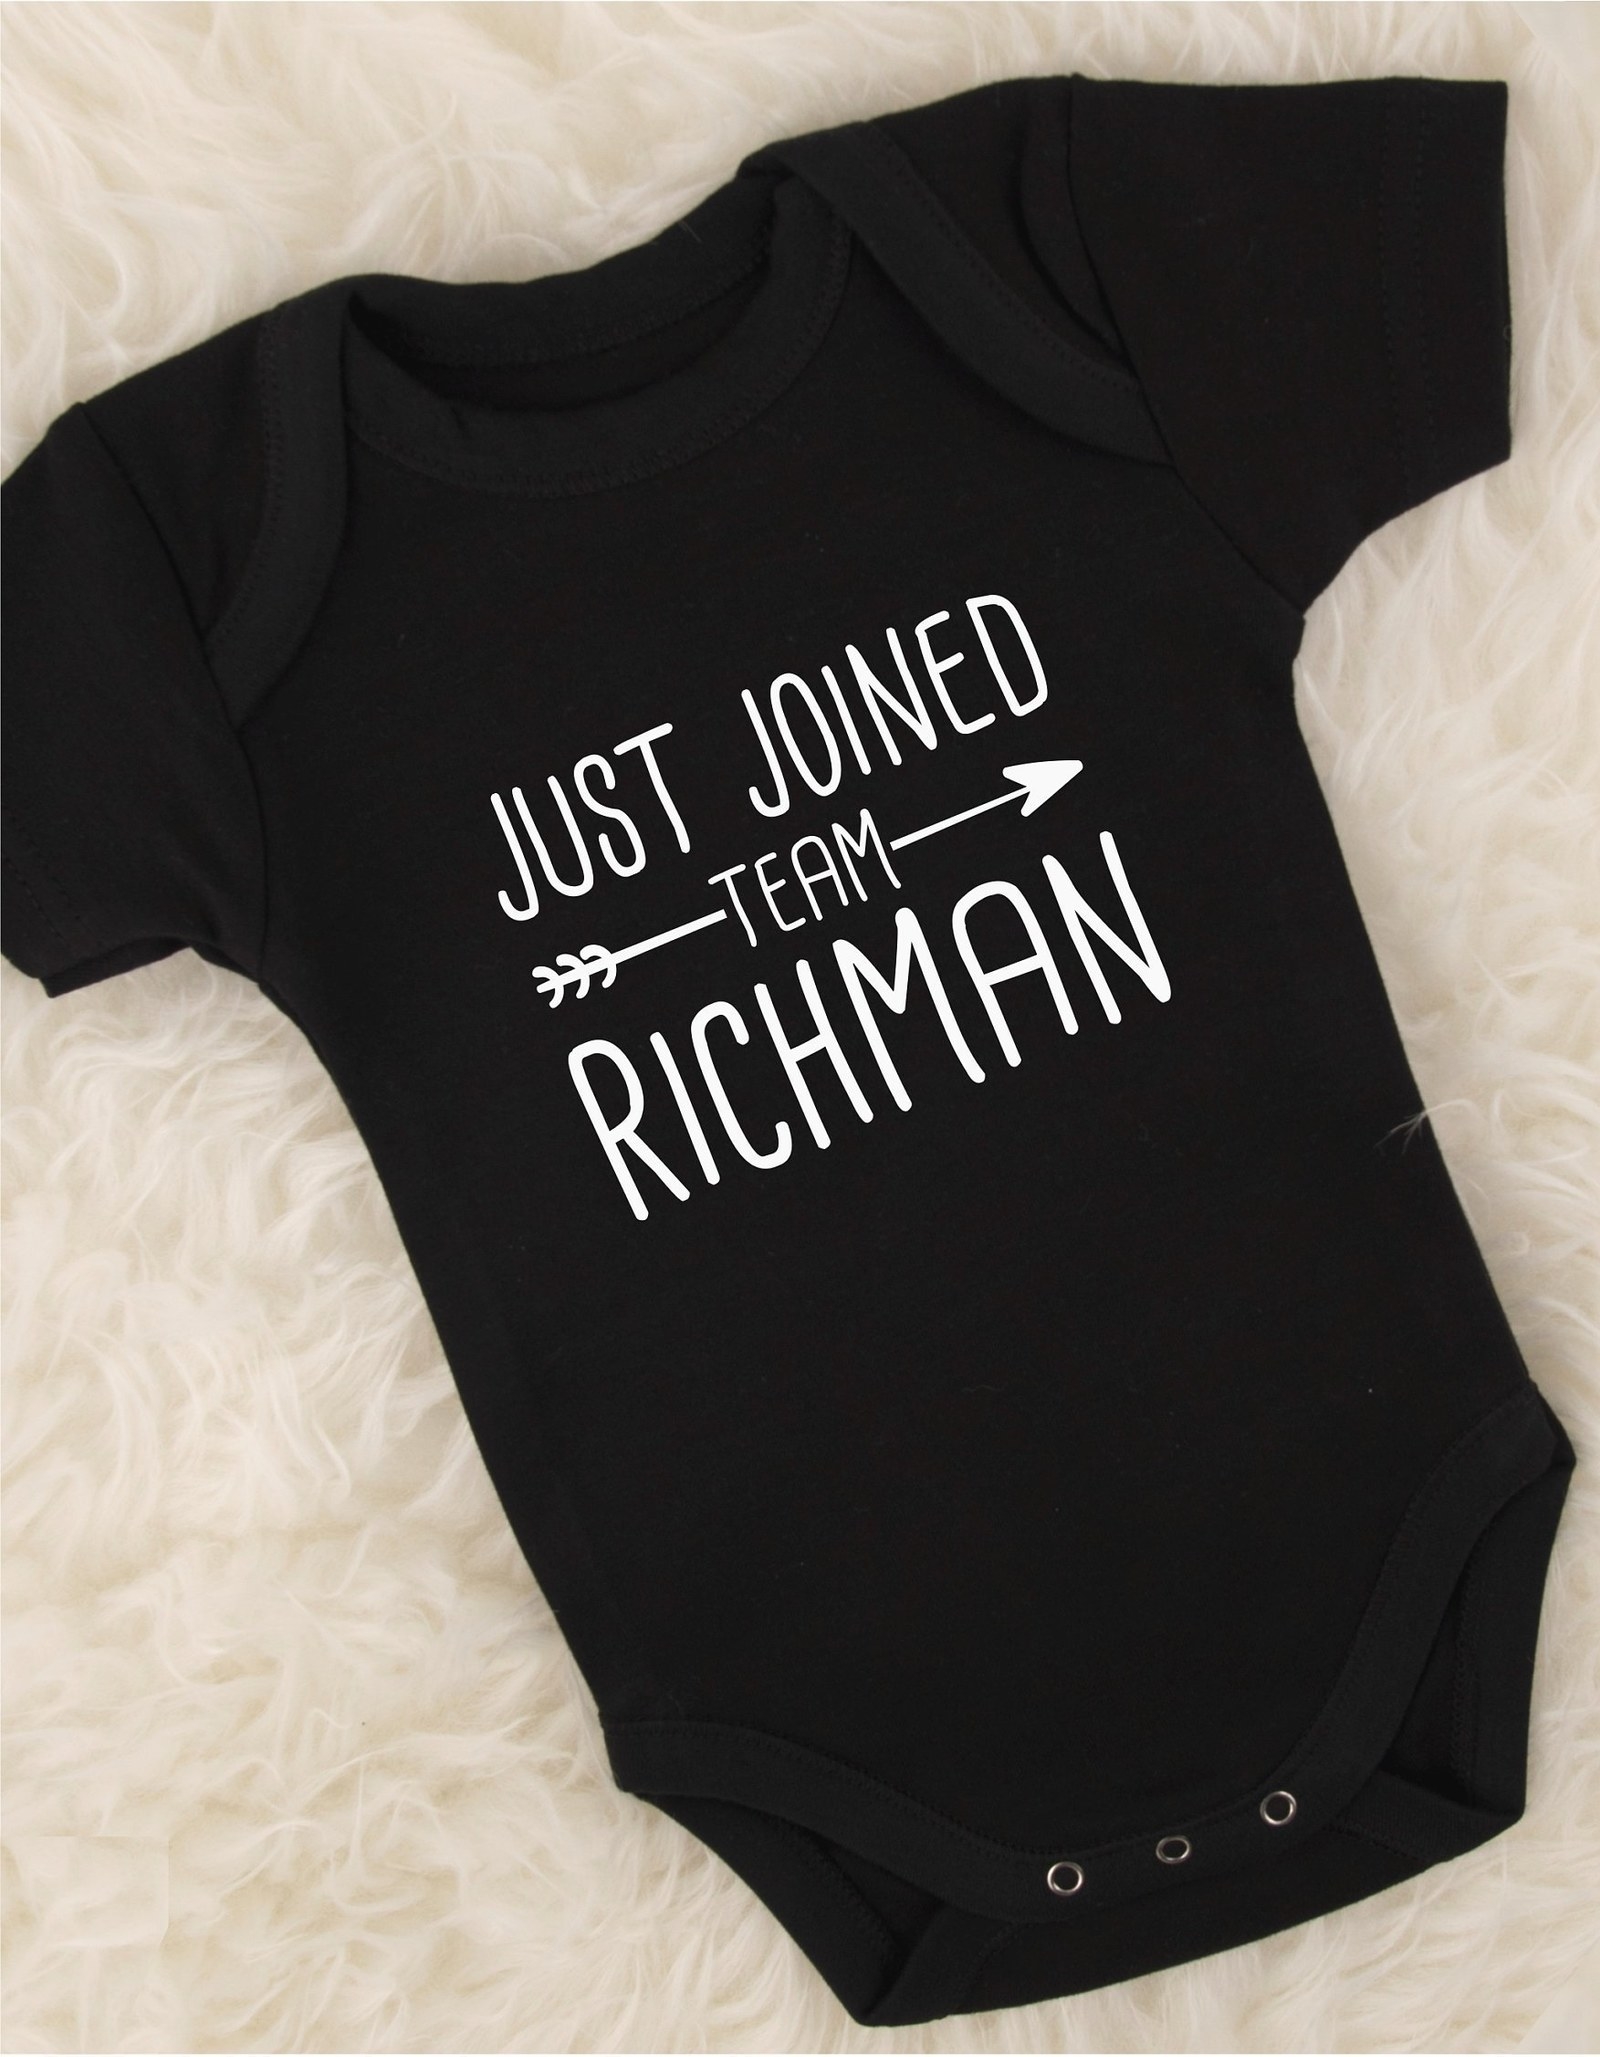 Baby Girl Onesie Personalized First Name and Monogram